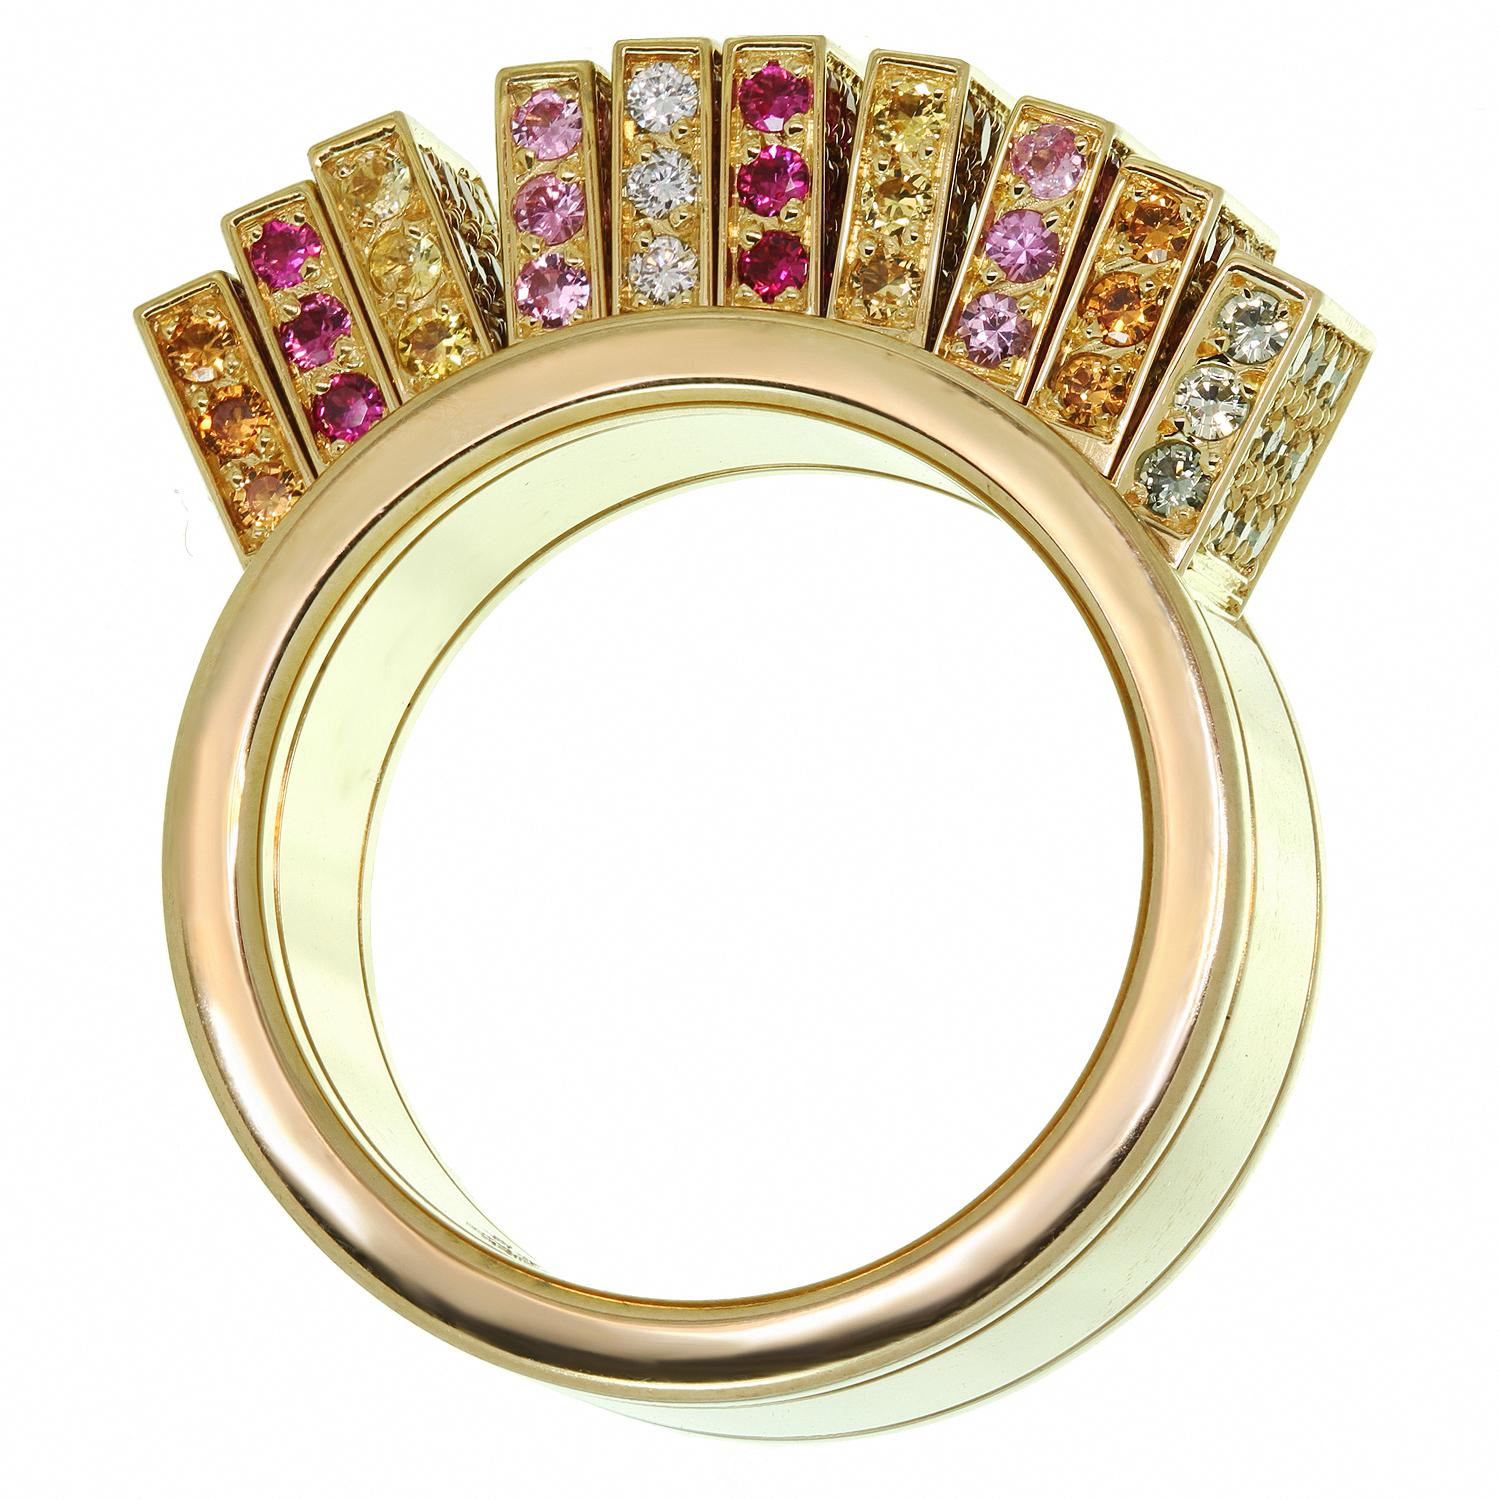 This gorgeous Cartier fan ring is crafted in 18k yellow gold and featuring movable panels set with round brilliant-cut diamonds and multi-color sapphires. Made in France circa 2010s. Measurements: 0.43